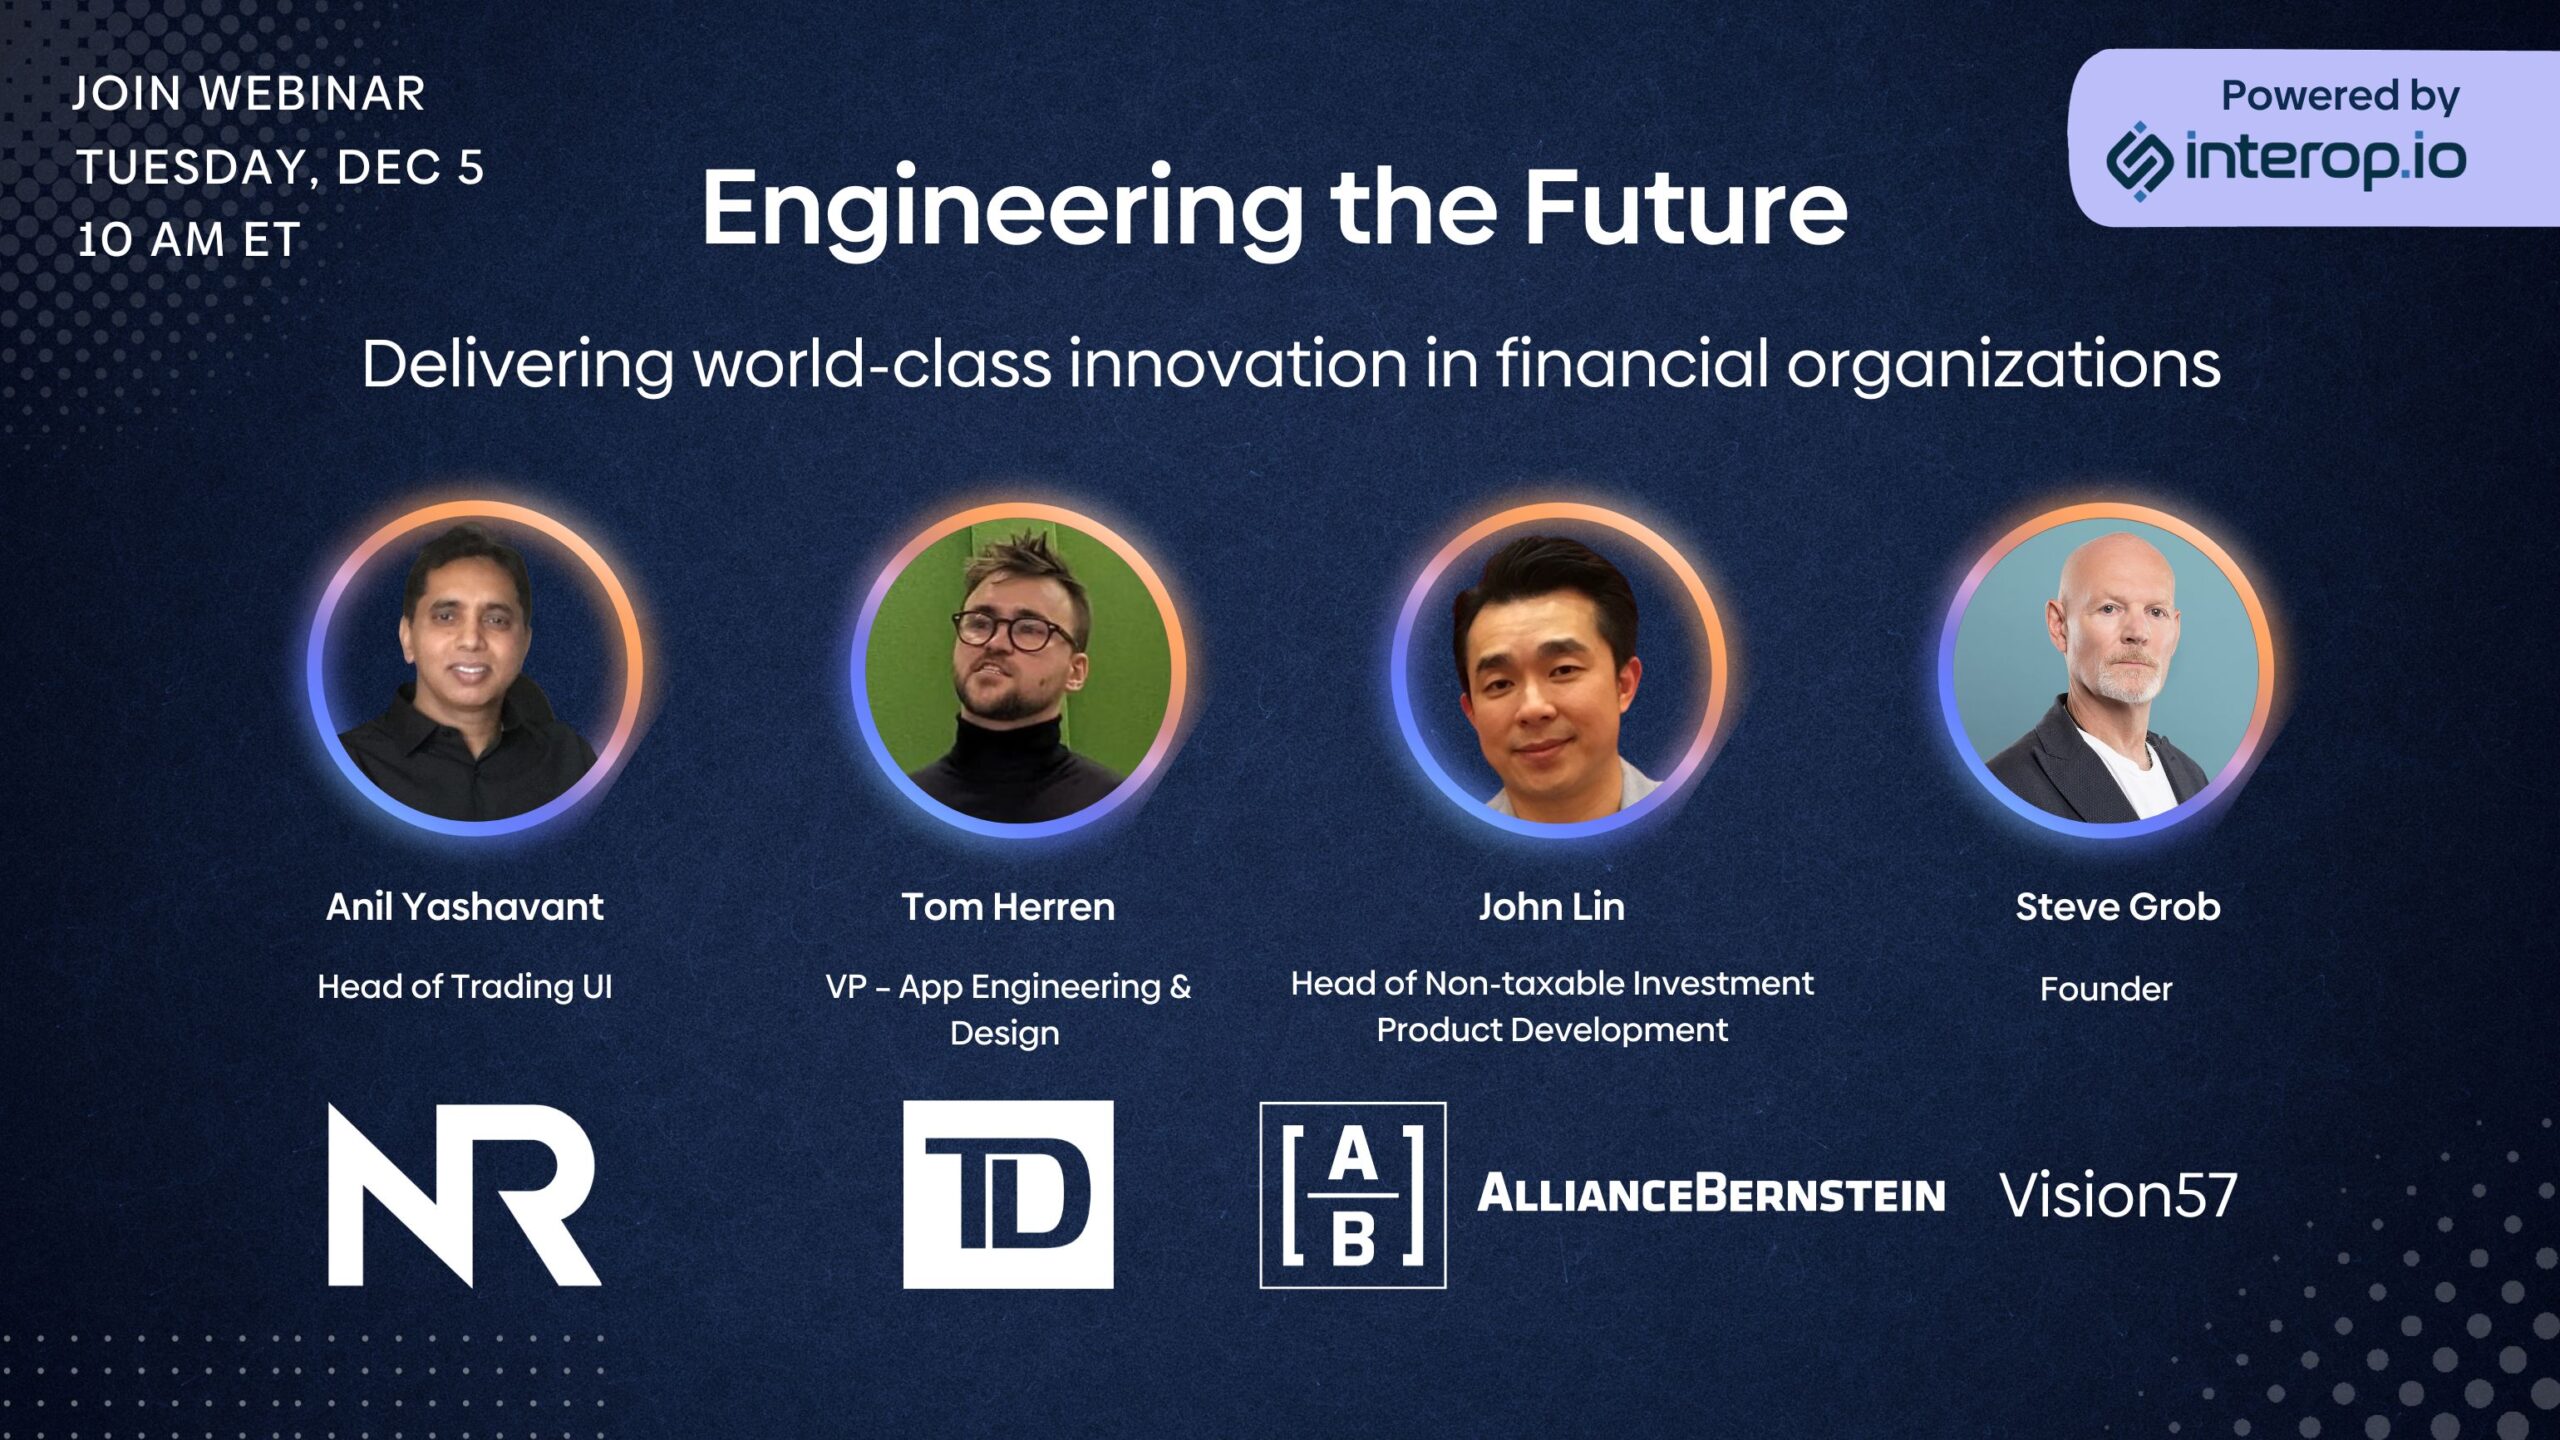 Engineering the Future Webinar by interop.io with TD, AB and NR cover image